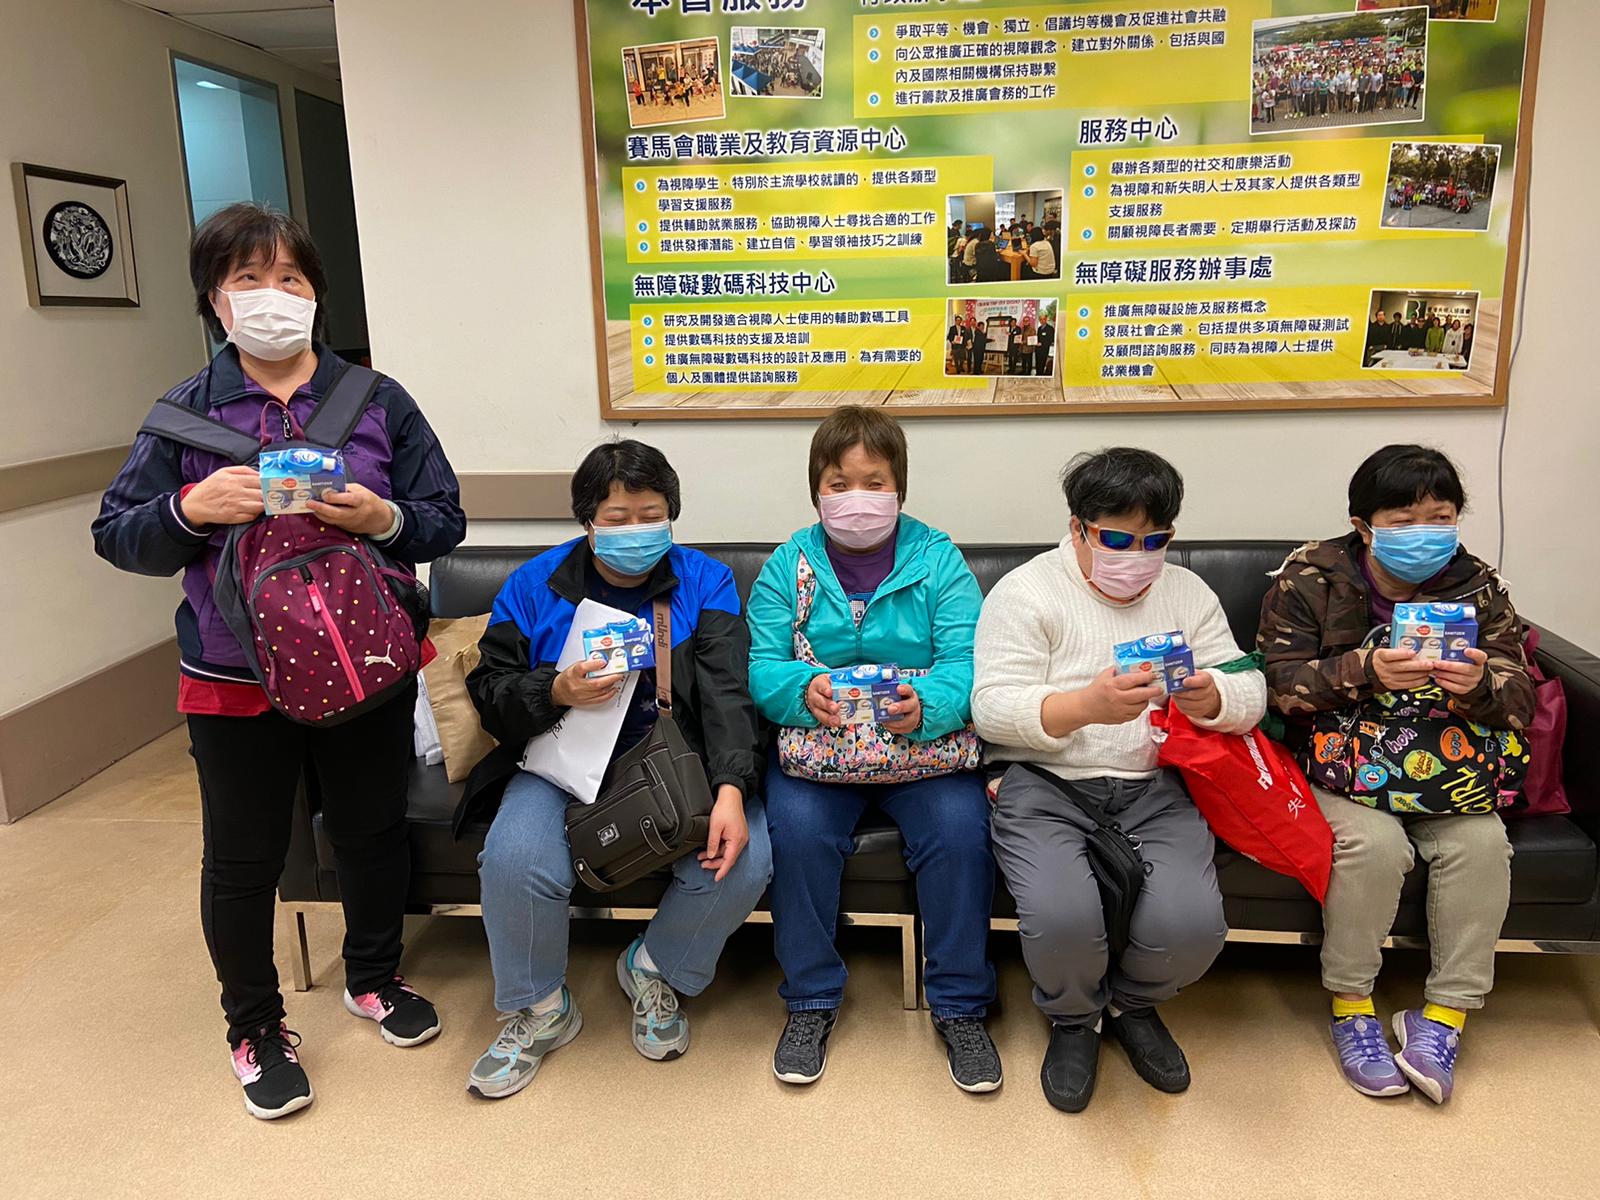 The visually impaired individuals’ sense of touch is crucial. With the shortage of disinfectant, however, they’re at greater risk of catching the virus when they go out. It’s especially crucial for them that they have hand sanitizer and wipes.。